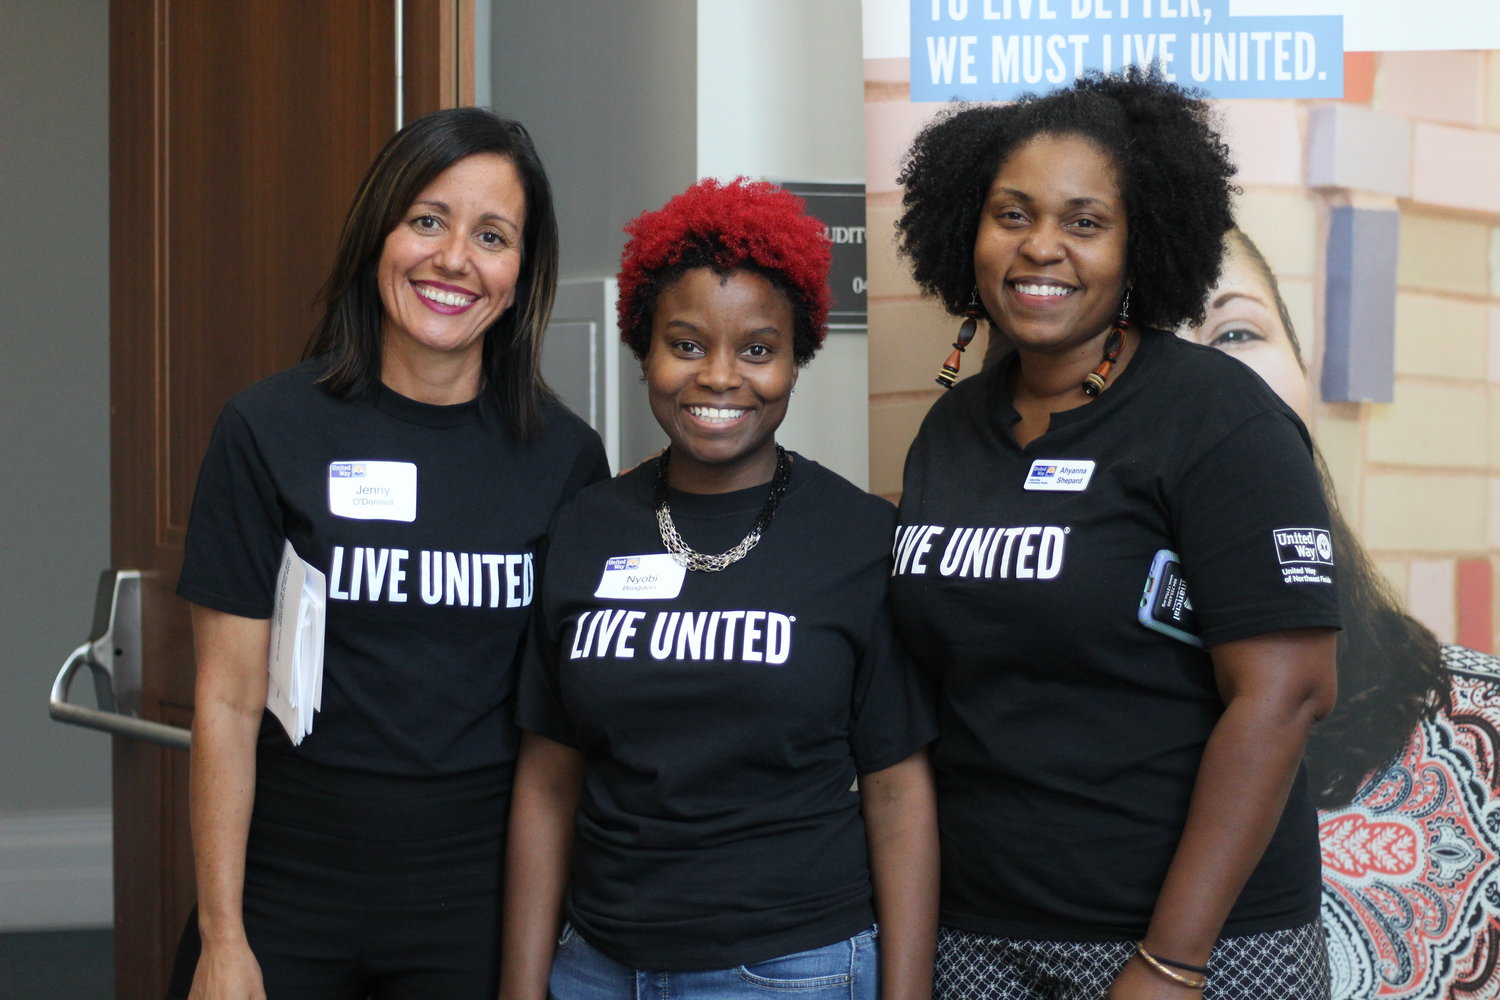 United Way of Northeast Florida staff members Jenny O’ Donnell (from left), Nyobi Brodgon and Ahyanna Shepard celebrate volunteers from across Northeast Florida at the annual Volunteer United event.